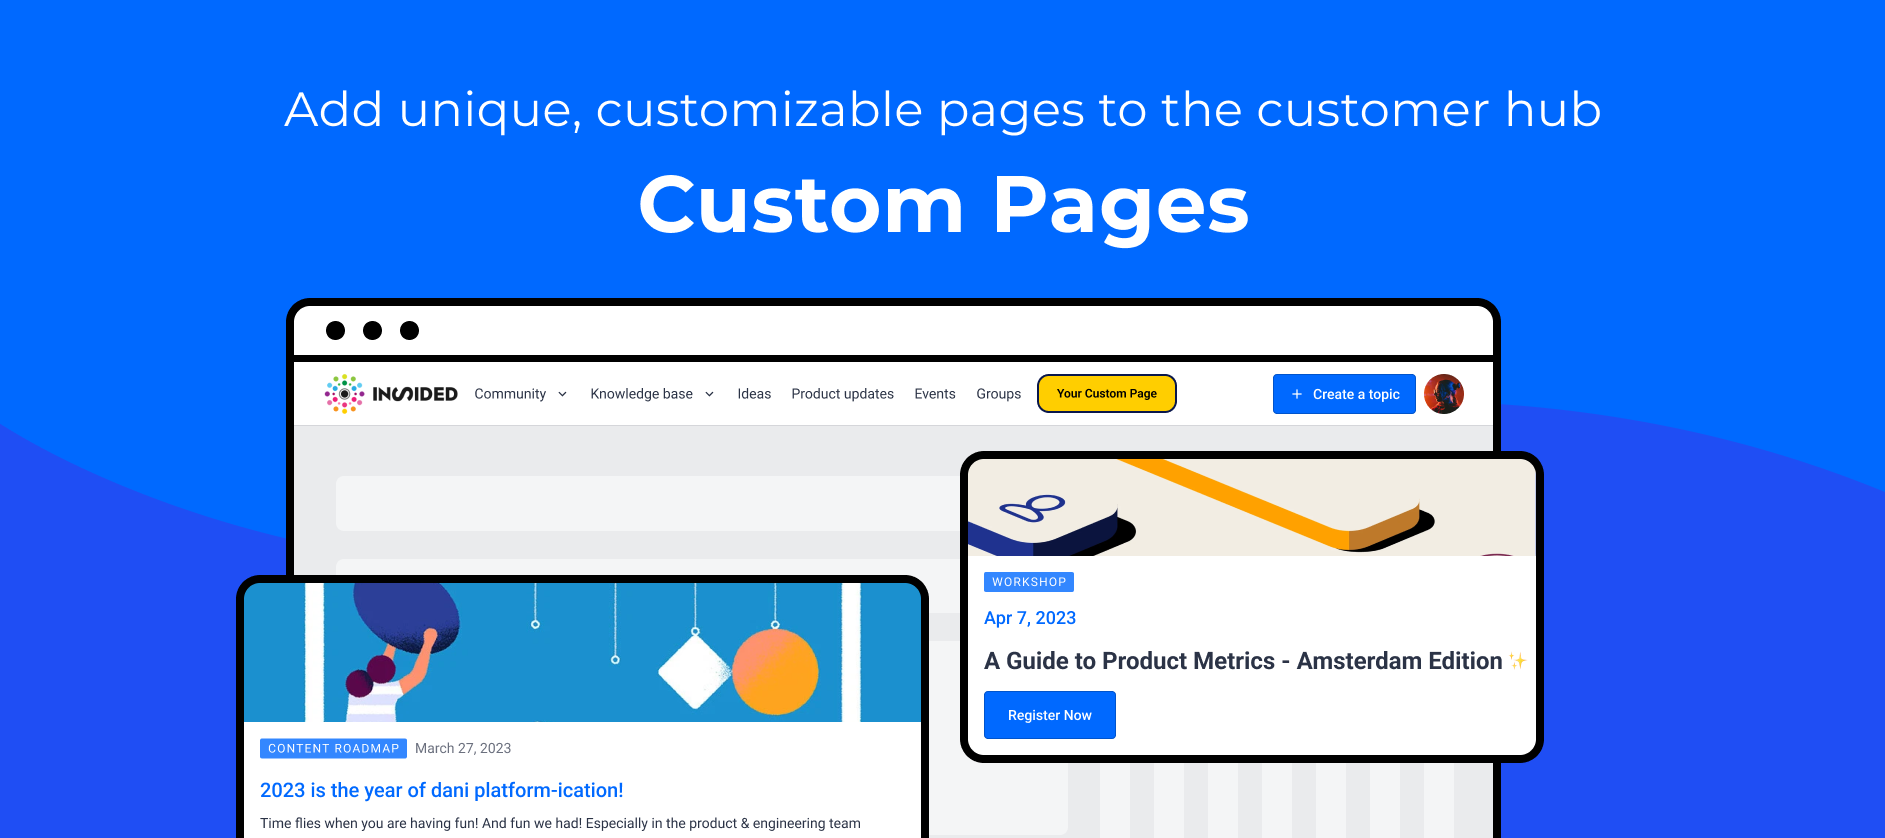 Introducing Custom Pages: Add unique, customizable pages to the customer hub